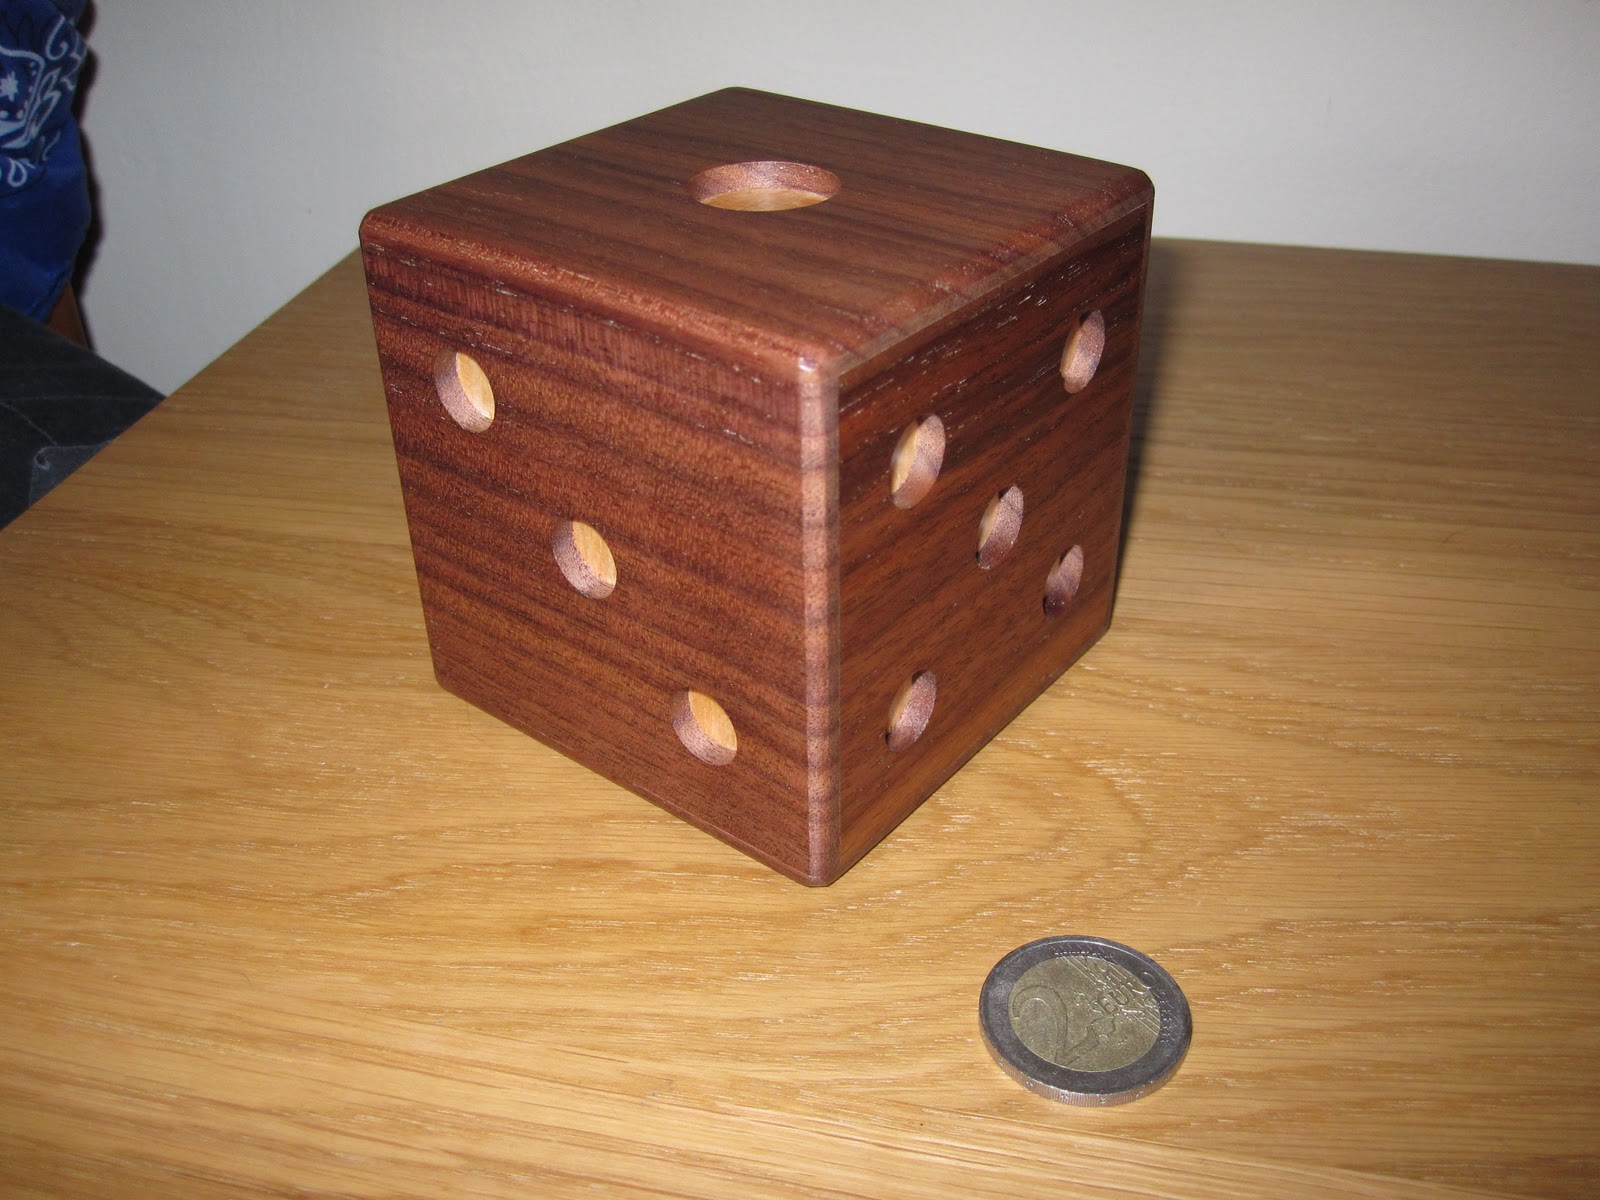 Chinese Puzzle Box This is the 'dice' puzzle box